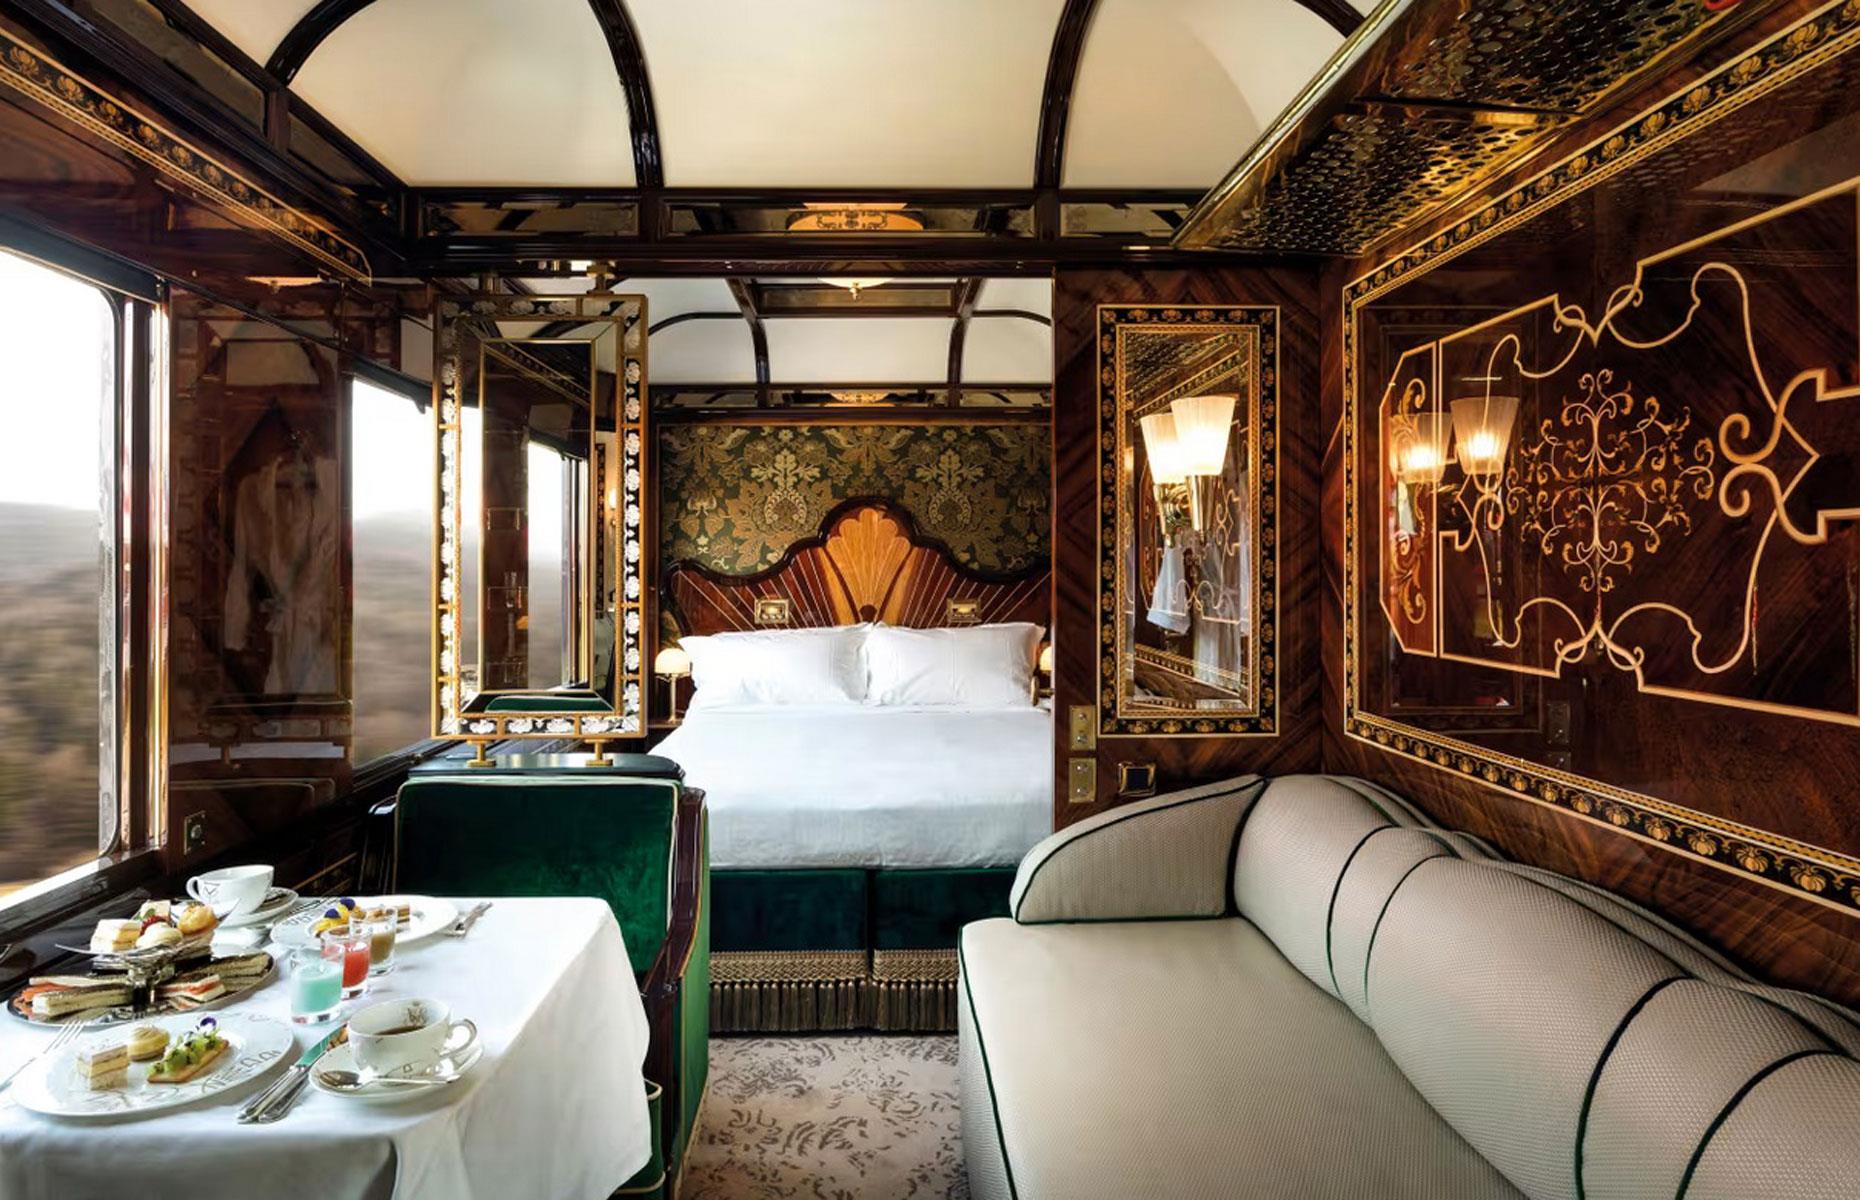 <p>Highlights include the Art Nouveau Bar Car and three opulent restaurant cars, where guests can feast on haute cuisine accompanied by premium wines.</p>  <p>The six magnificent Grand Suites are the largest and most decadent booking options for guests looking to travel in serious style. They each feature their own distinctive décor, a double bed, lounge area, and private bathroom. Each Grand Suite is subject to a 24-hour butler service, and guests can enjoy unlimited champagne. </p>  <p>Of course, this doesn't come cheap. A Grand Suite for the classic London to Venice journey costs from $12,906 (£10,165) per person based on double occupancy – a jaw-dropping price when you consider that passengers spend just one night on the train.</p>  <p><strong>But for travellers with a limitless budget, there are even more spectacular options to consider...</strong></p>